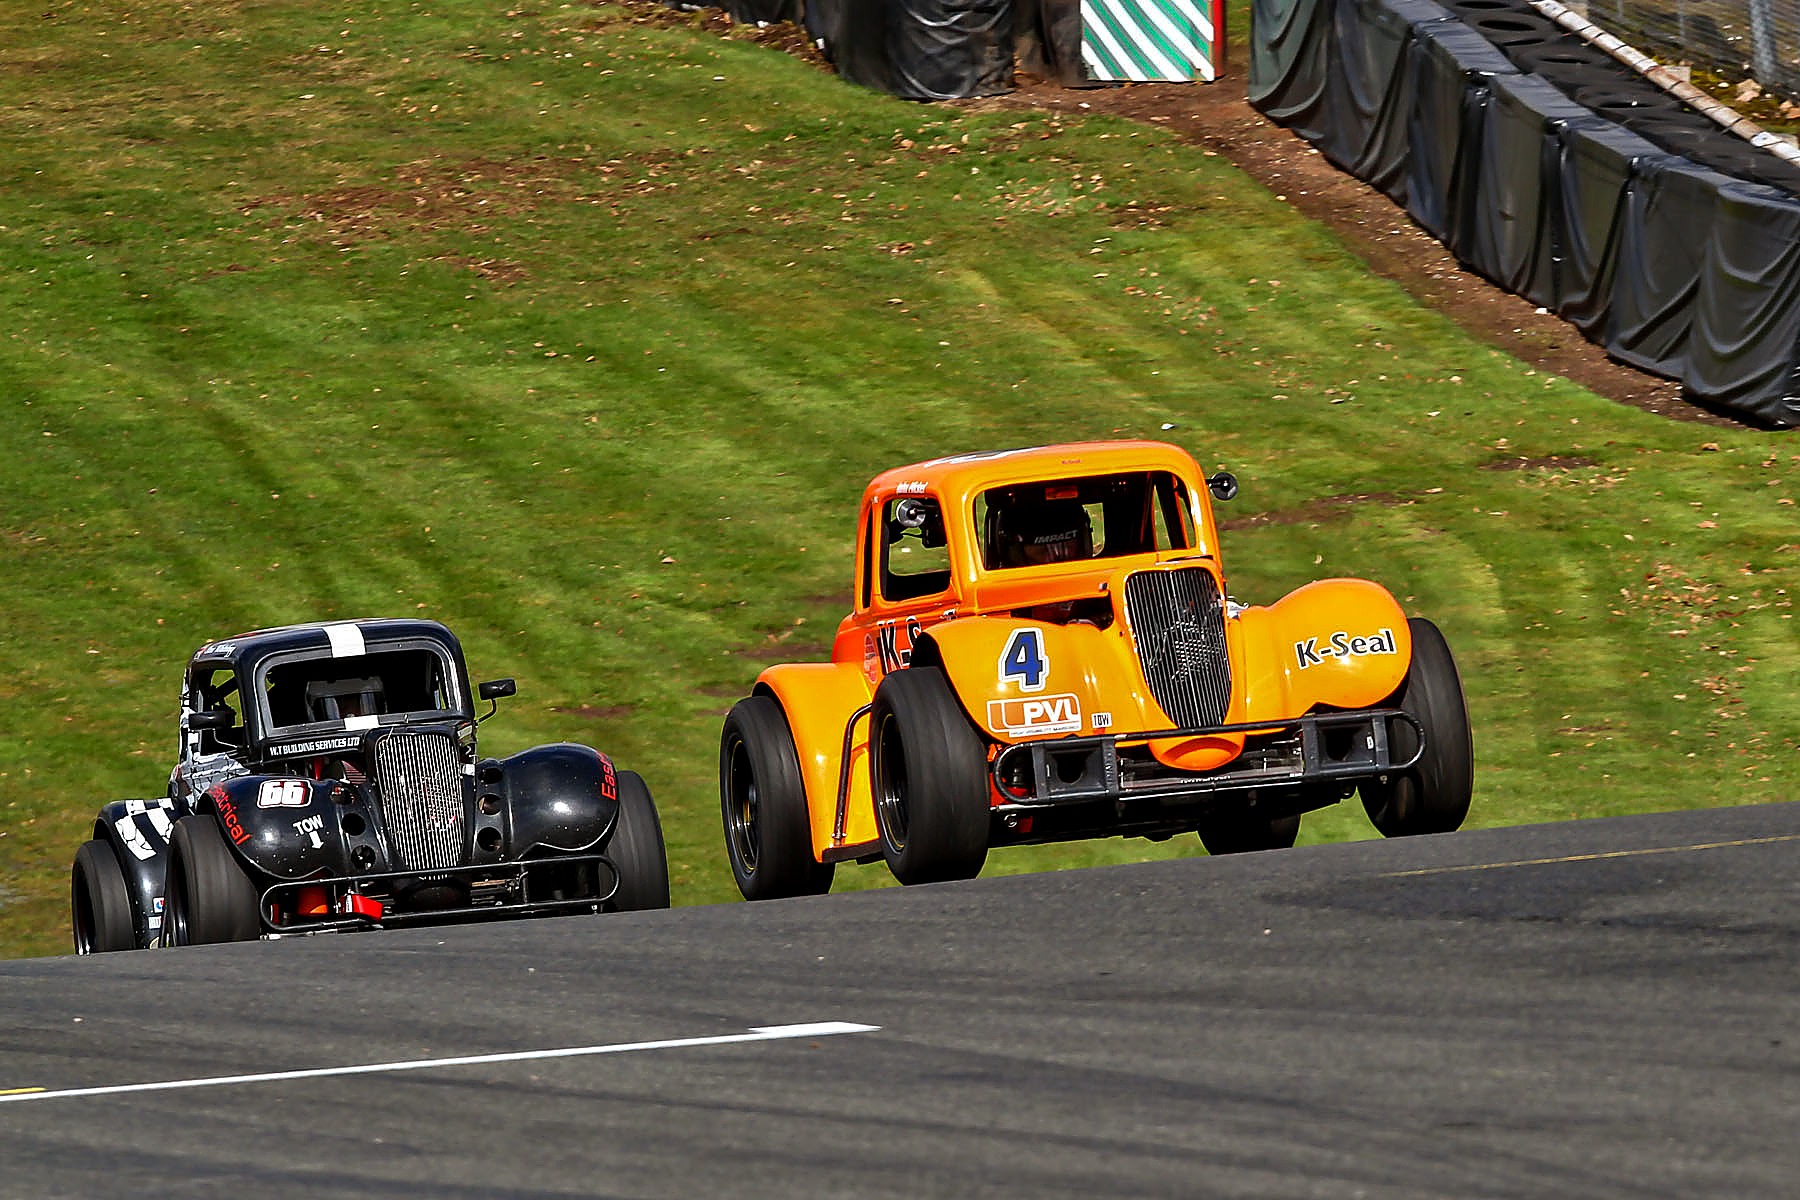 2015 - Round 1 - Oulton Park Gallery Image 24